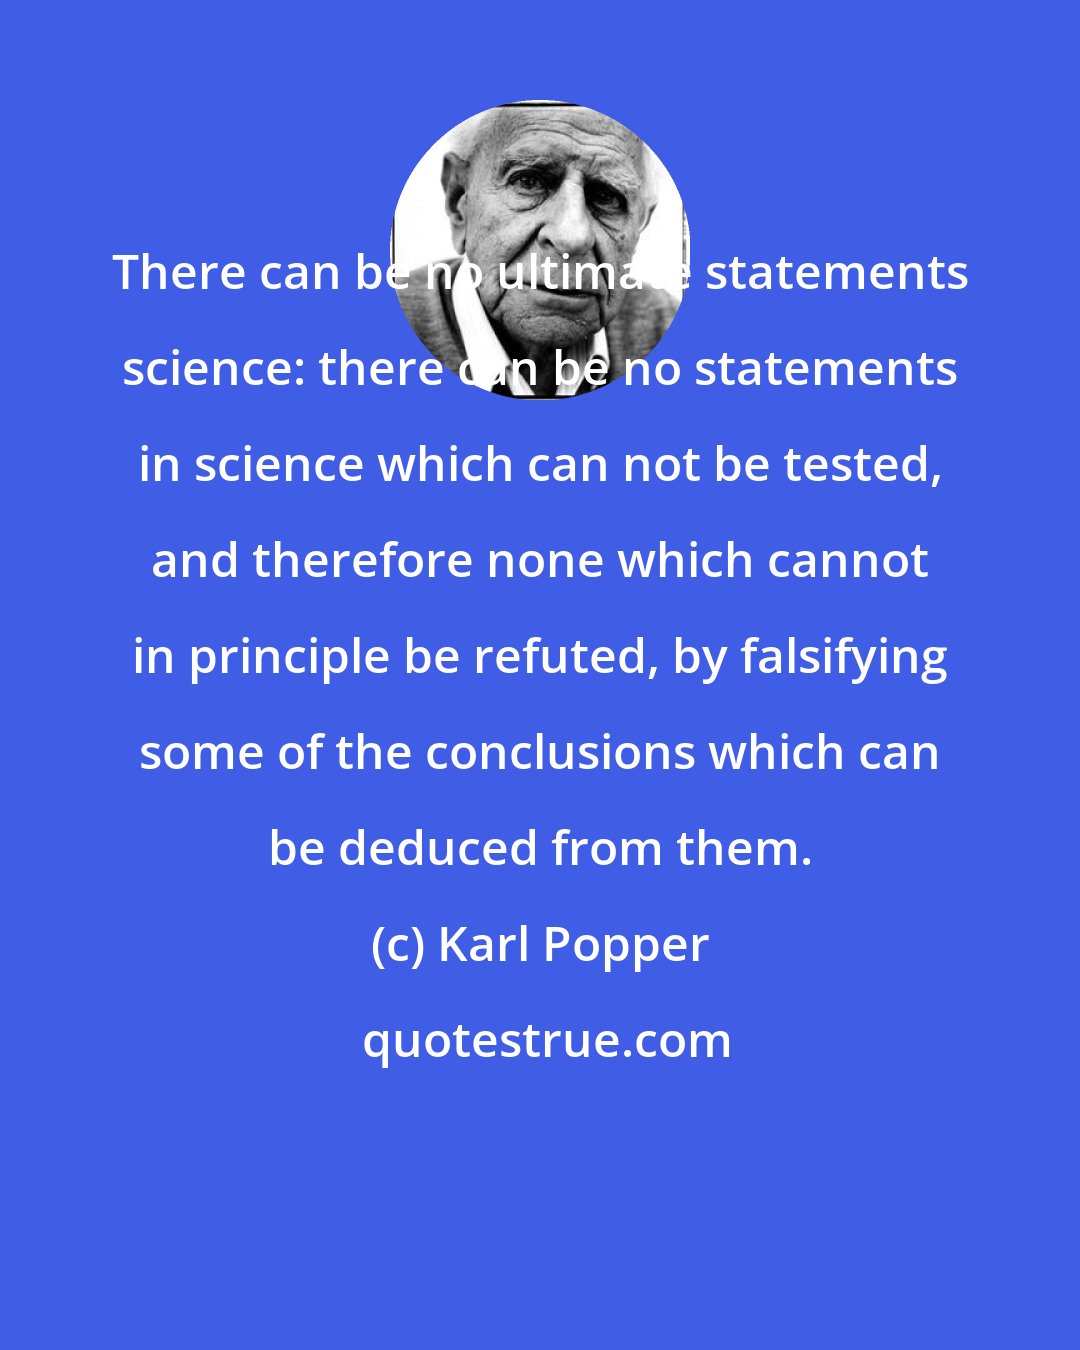 Karl Popper: There can be no ultimate statements science: there can be no statements in science which can not be tested, and therefore none which cannot in principle be refuted, by falsifying some of the conclusions which can be deduced from them.